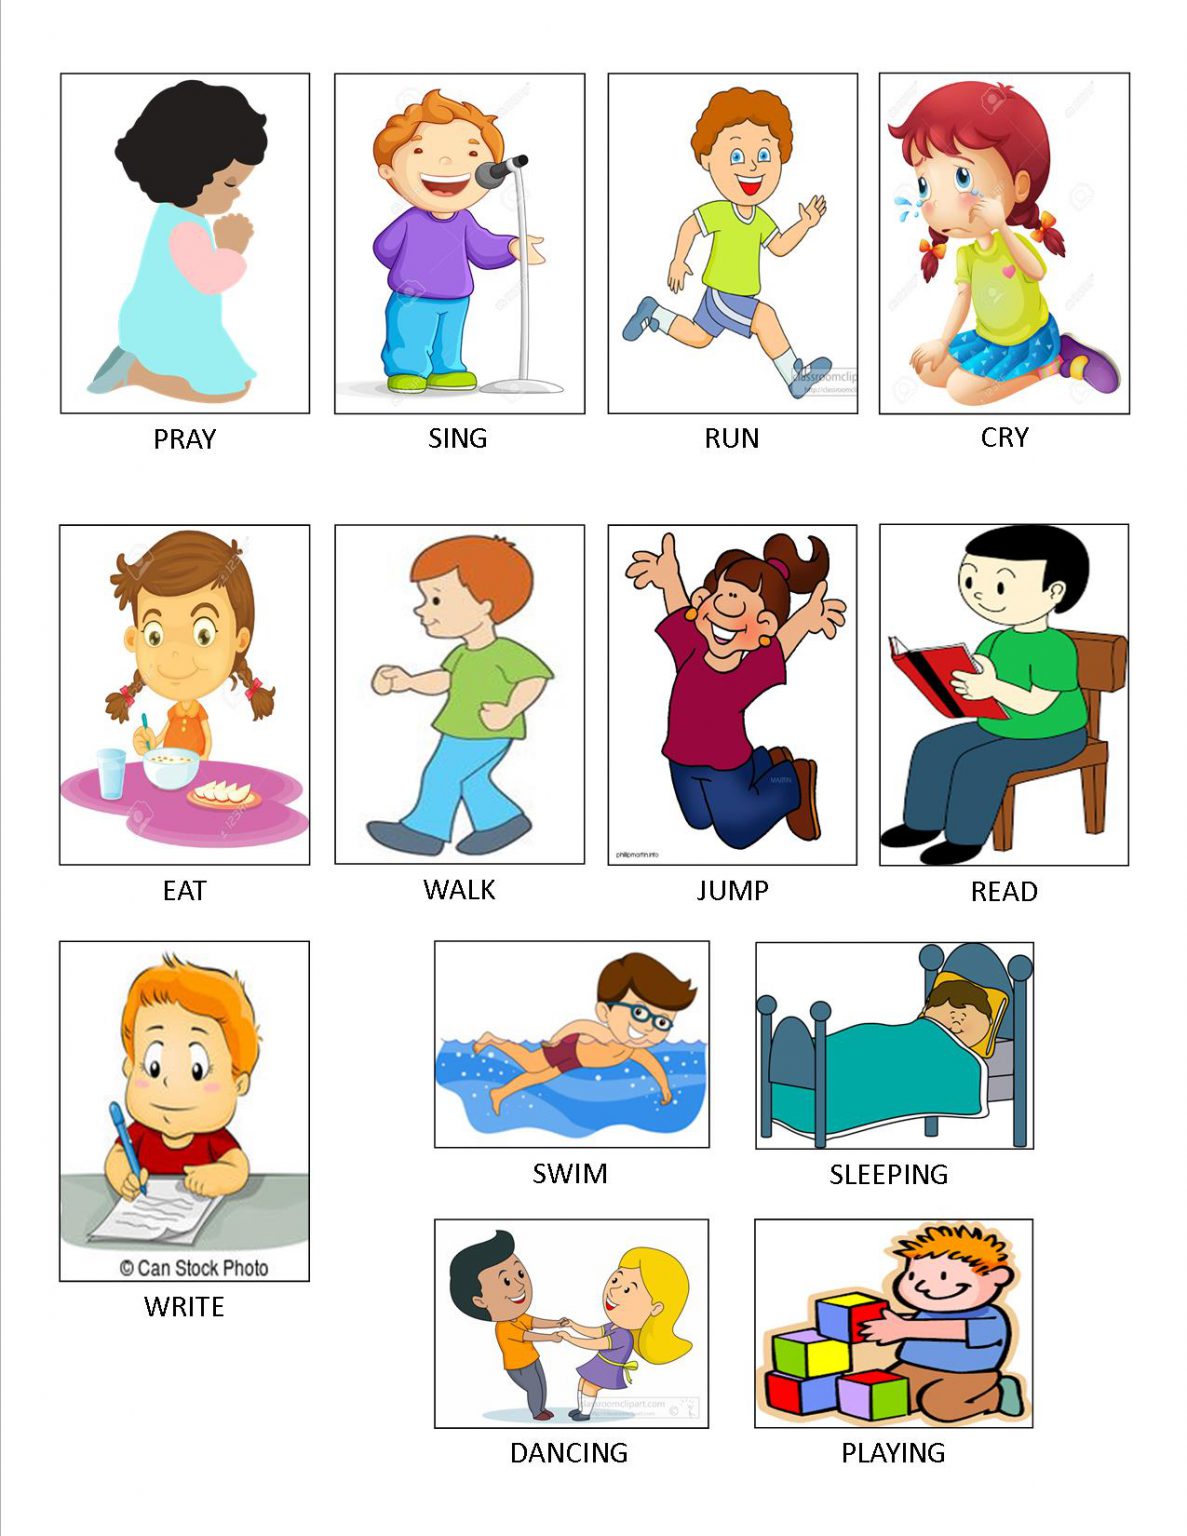 english-basic-action-words-for-kids-bvs-elearning